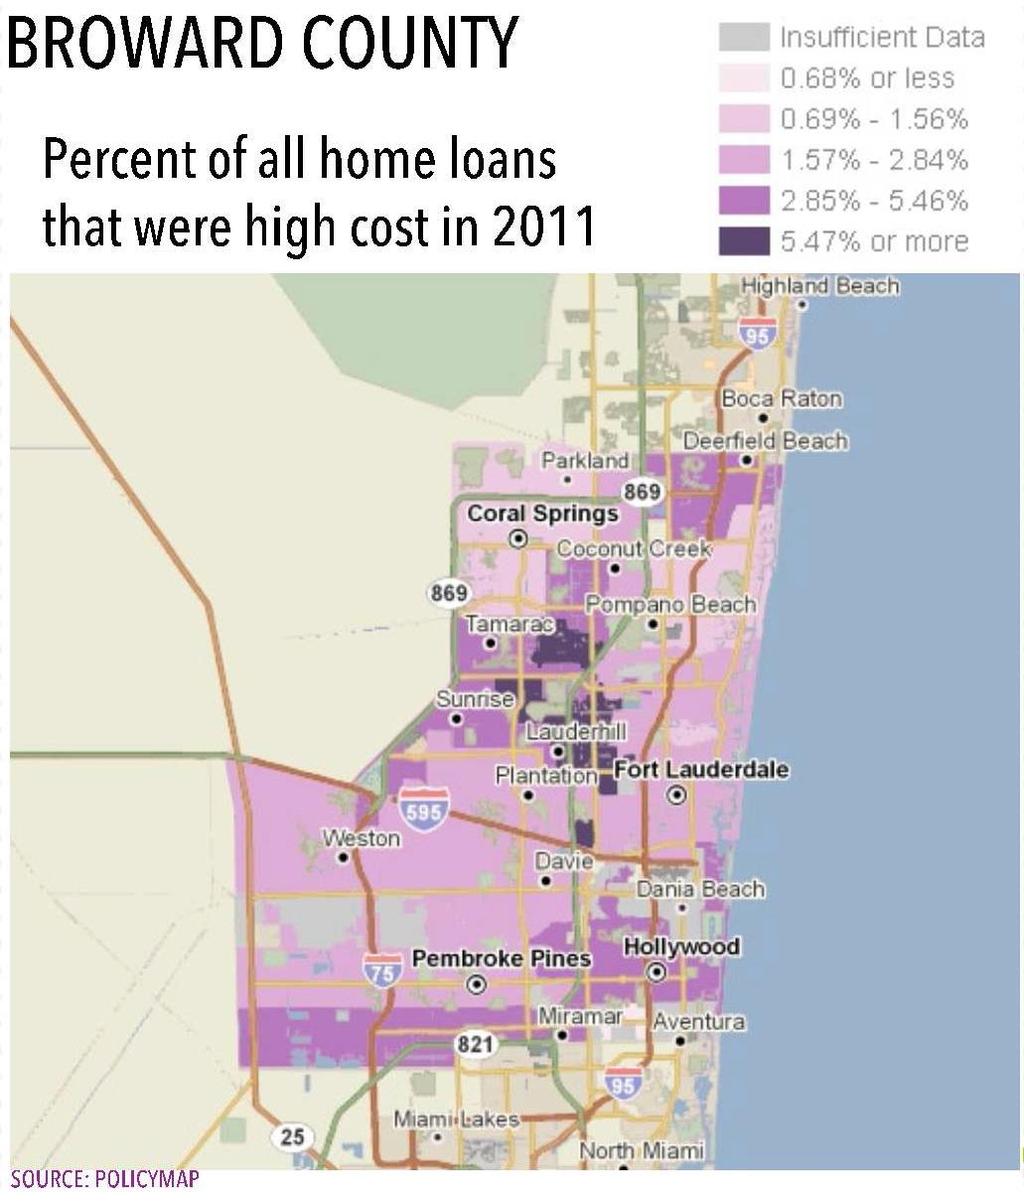 Concentrations of High Cost Lending 31 Map shows the areas that had higher concentrations of high cost